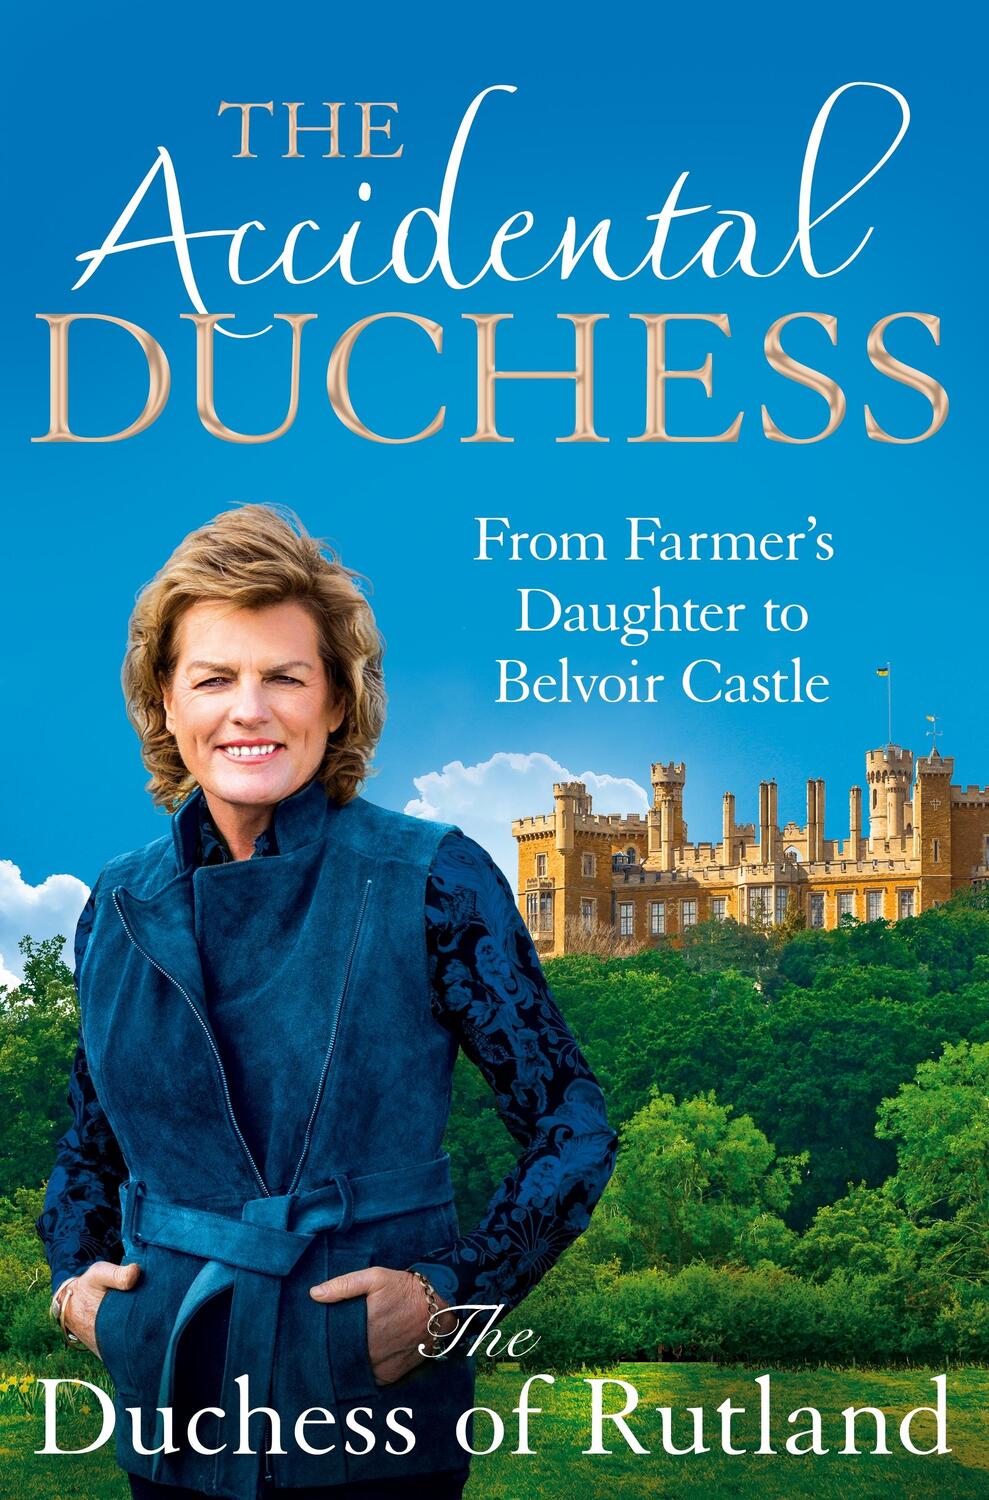 Autor: 9781035002108 | The Accidental Duchess | From Farmer's Daughter to Belvoir Castle